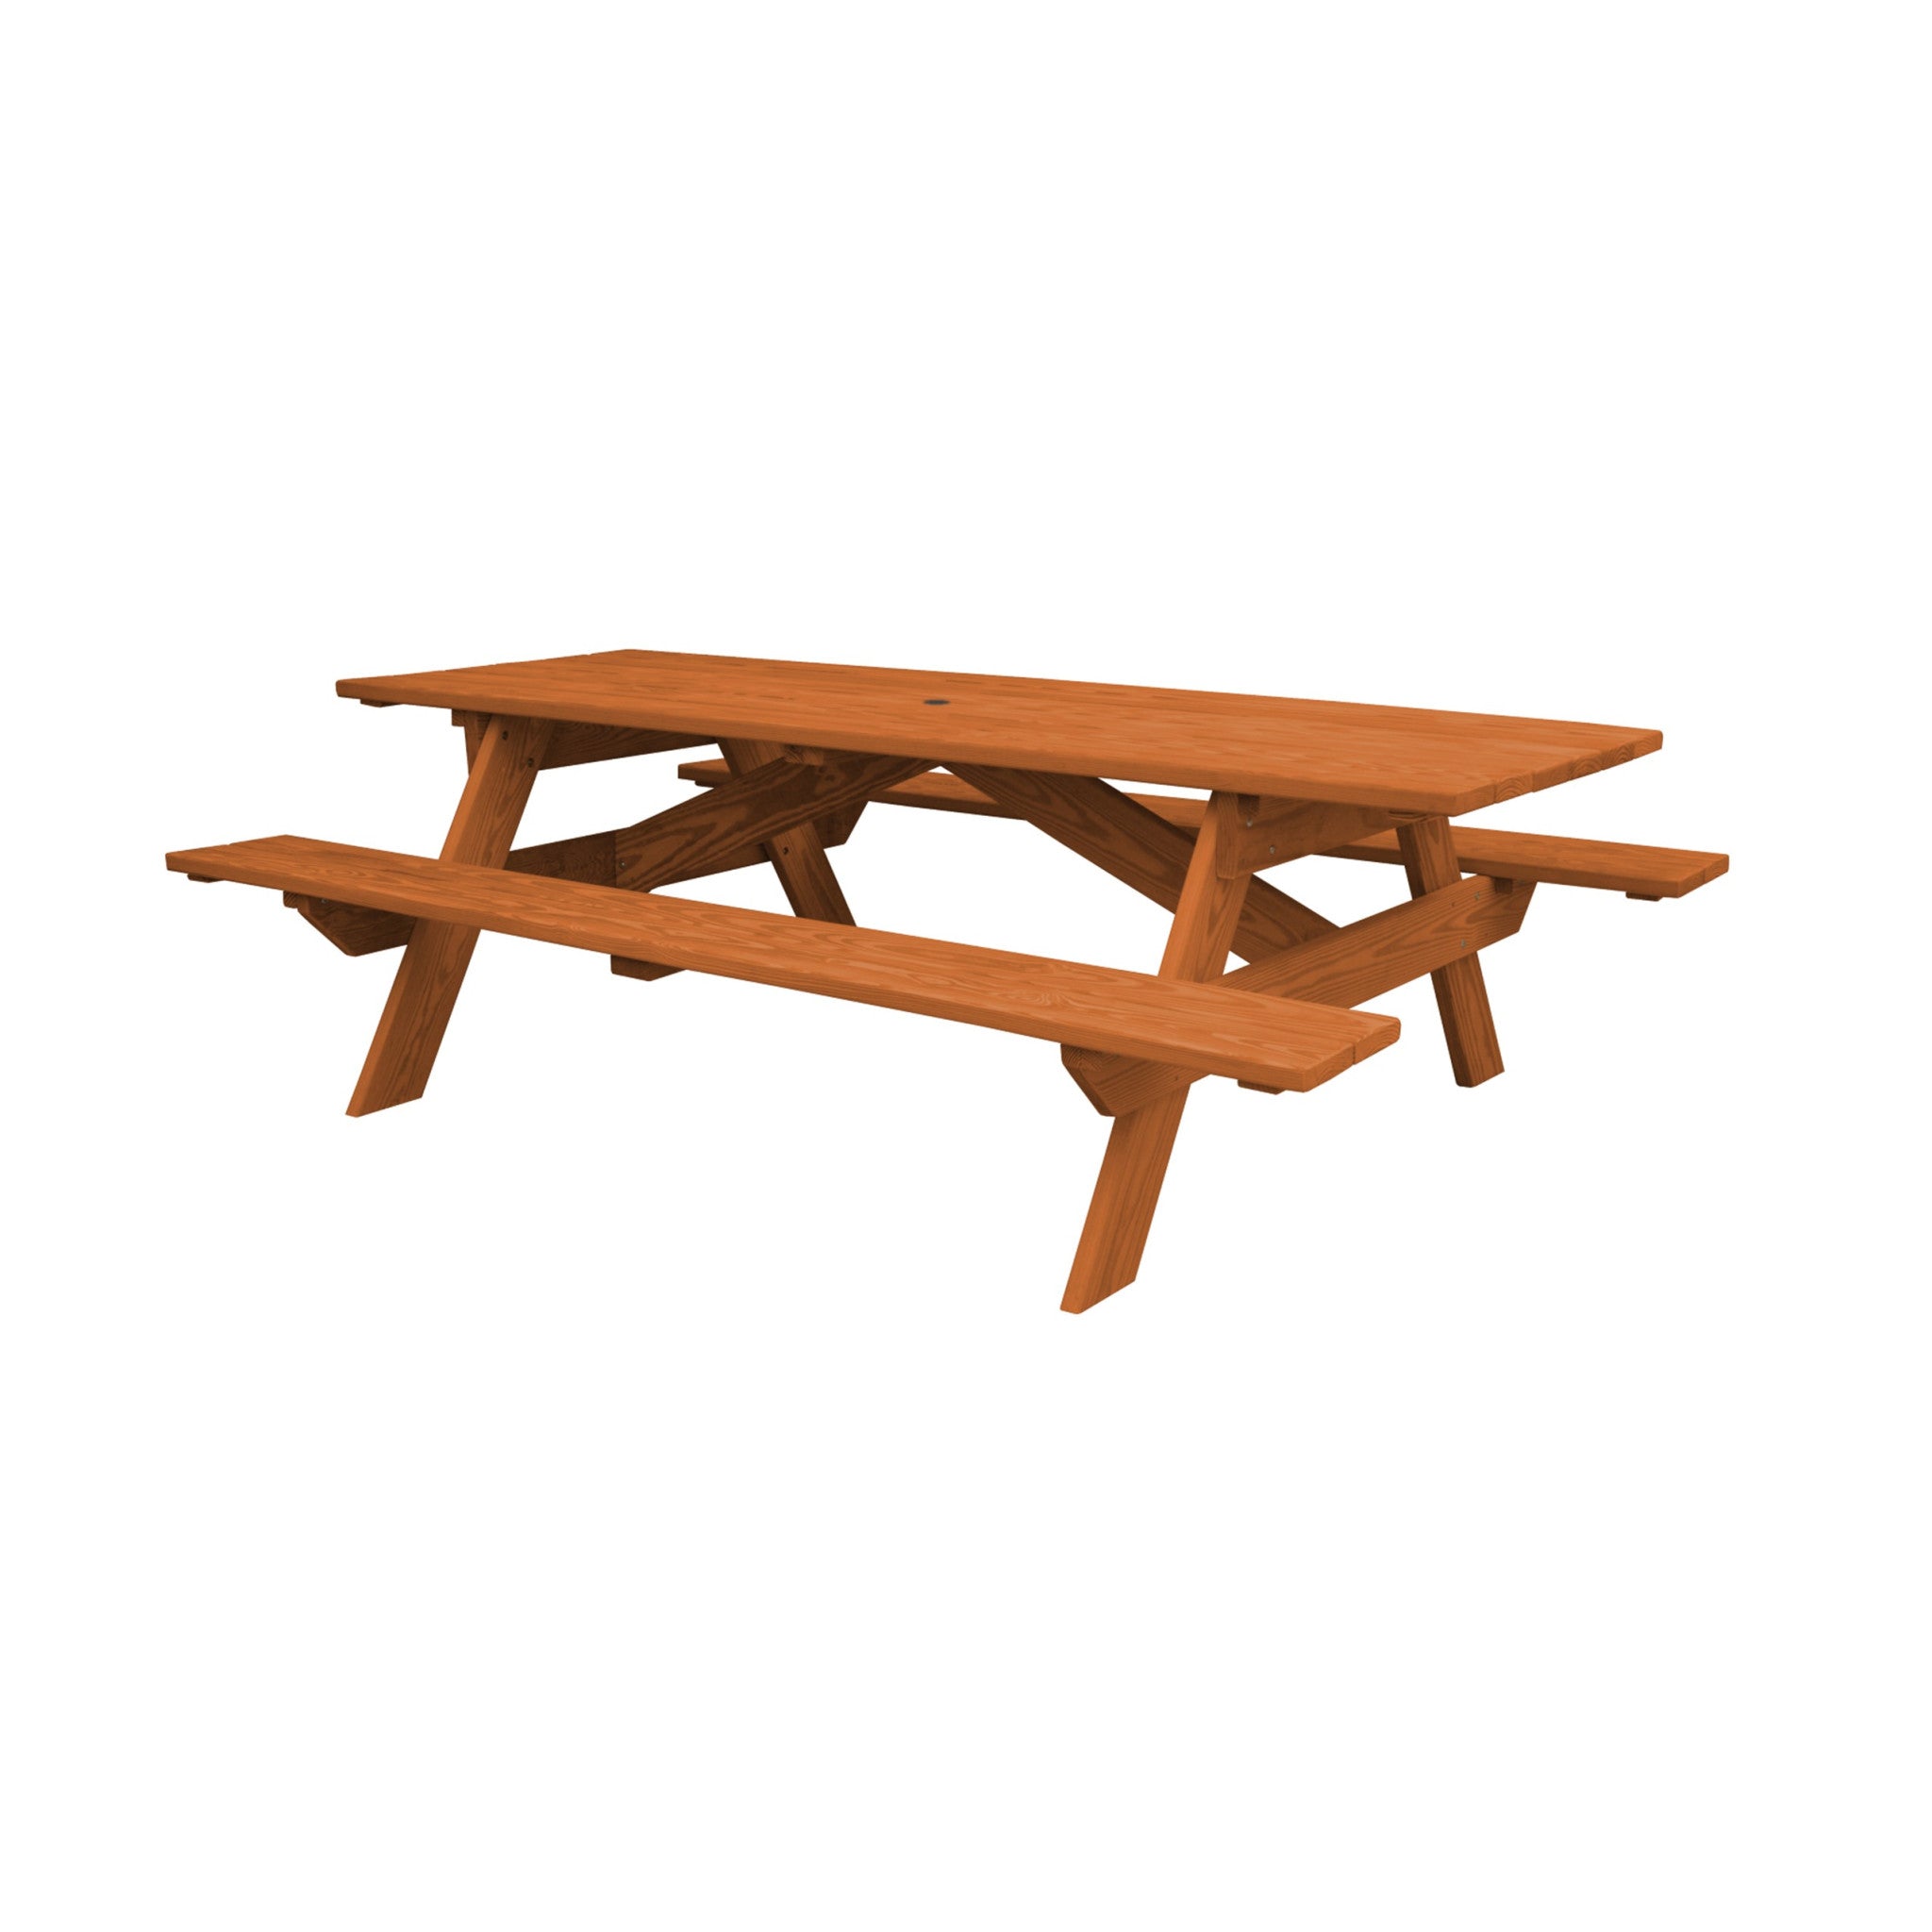 94" Cedar Chest Solid Wood Outdoor Picnic Table with Umbrella Hole